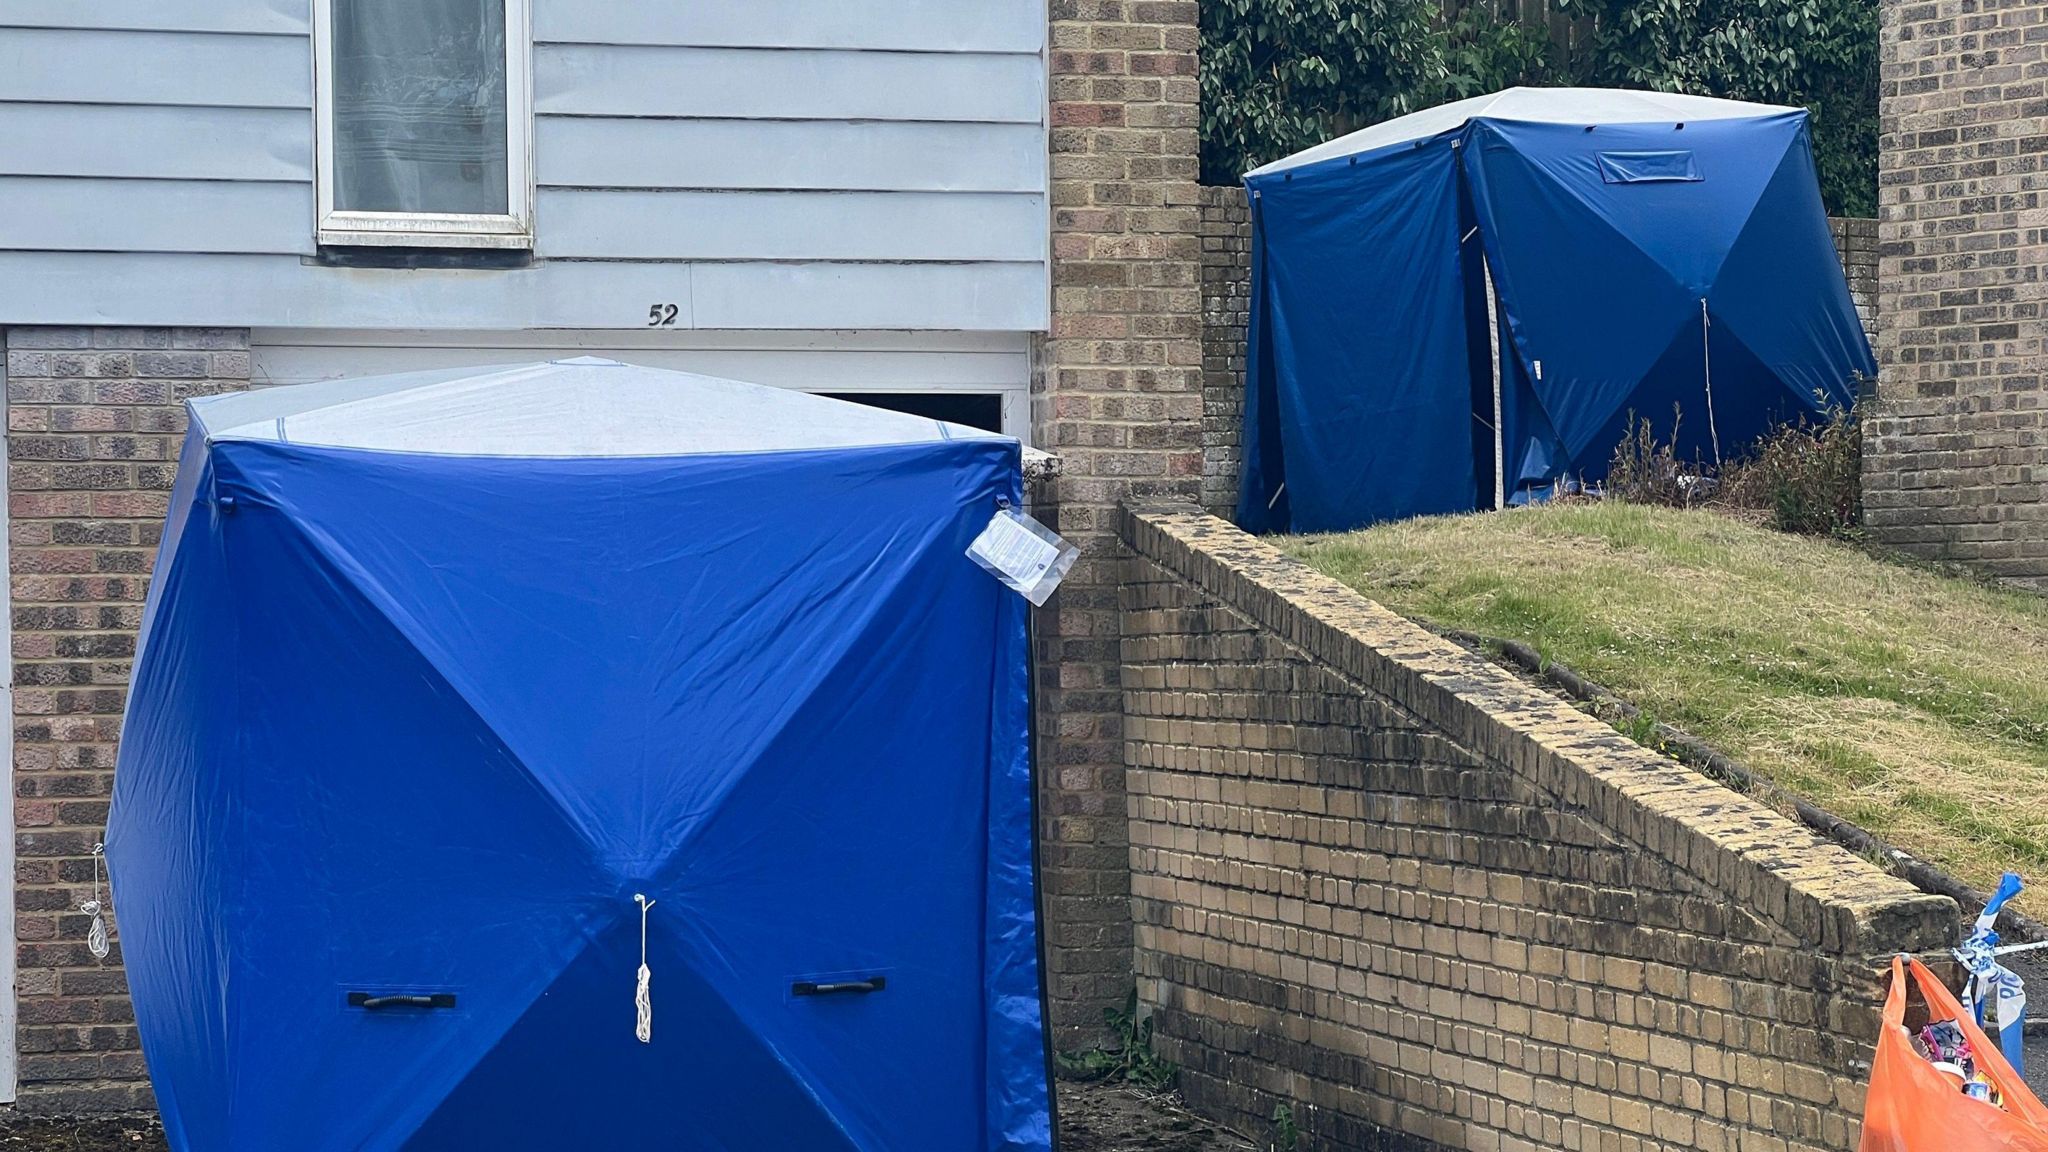 Two blue tents - one in front of a house, with one in an upper grass area - outside the Bracknell house